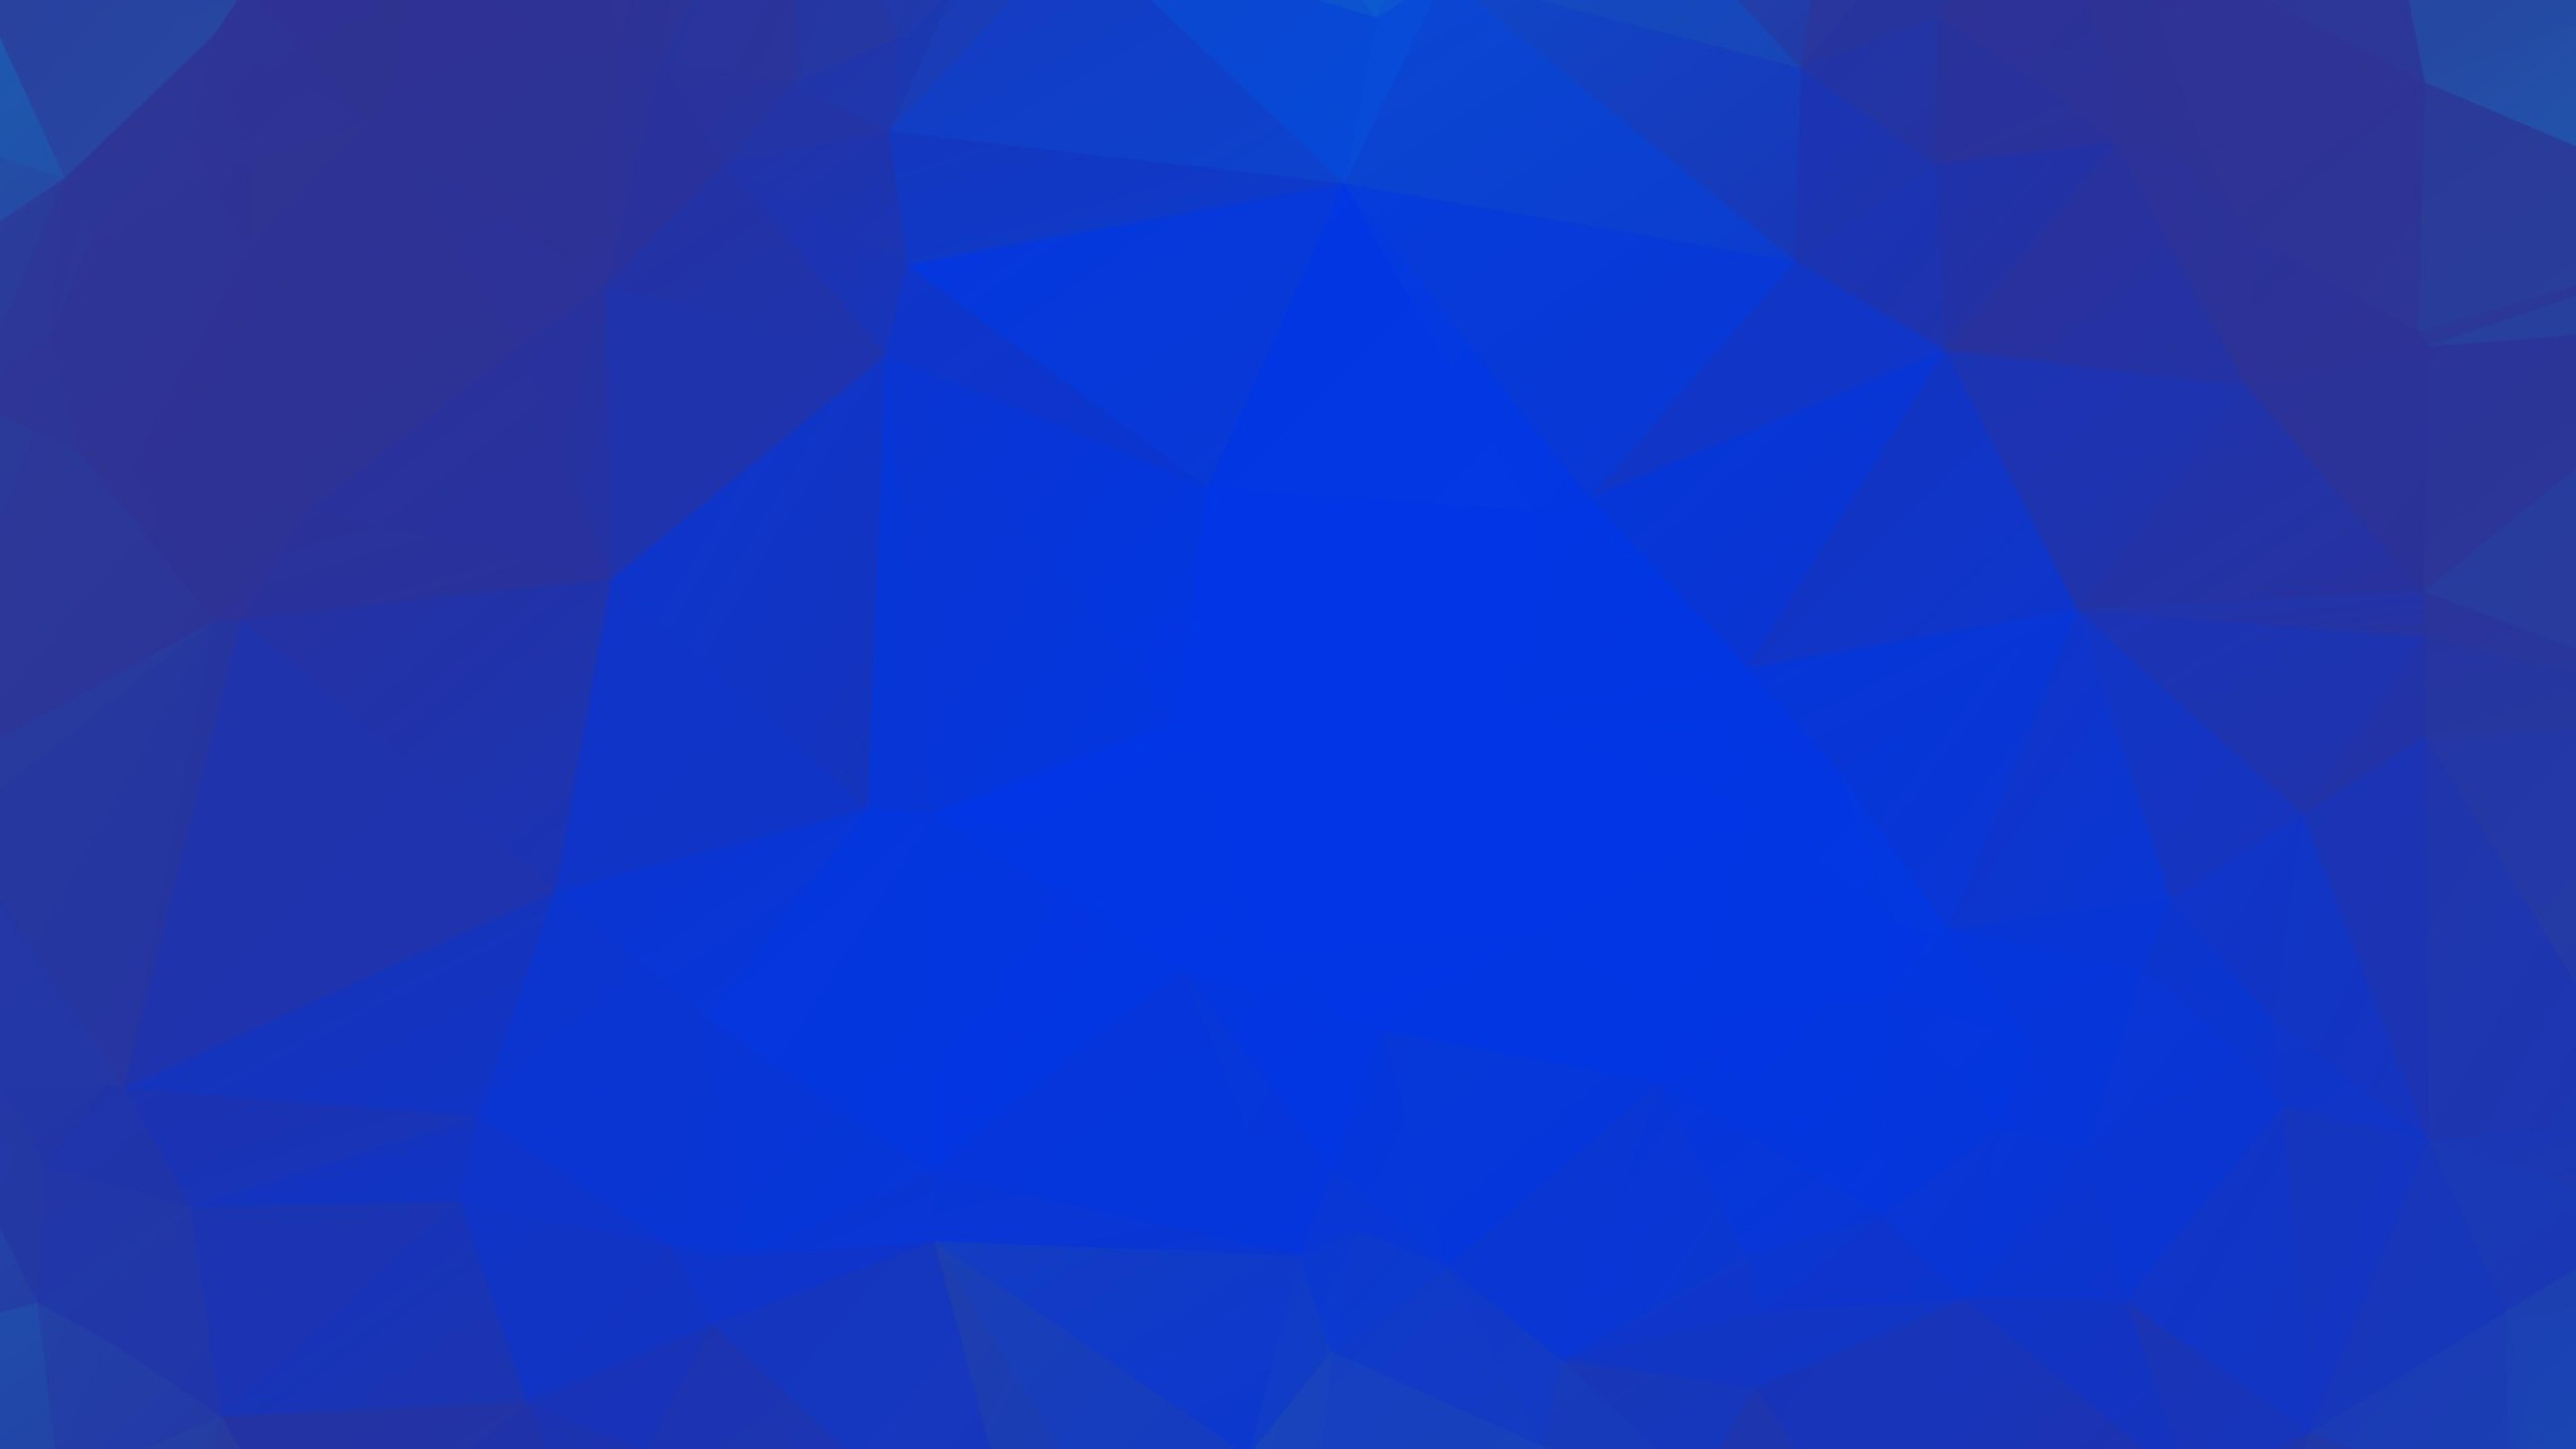 Low Poly Blue Geometry Artwork Wallpapers